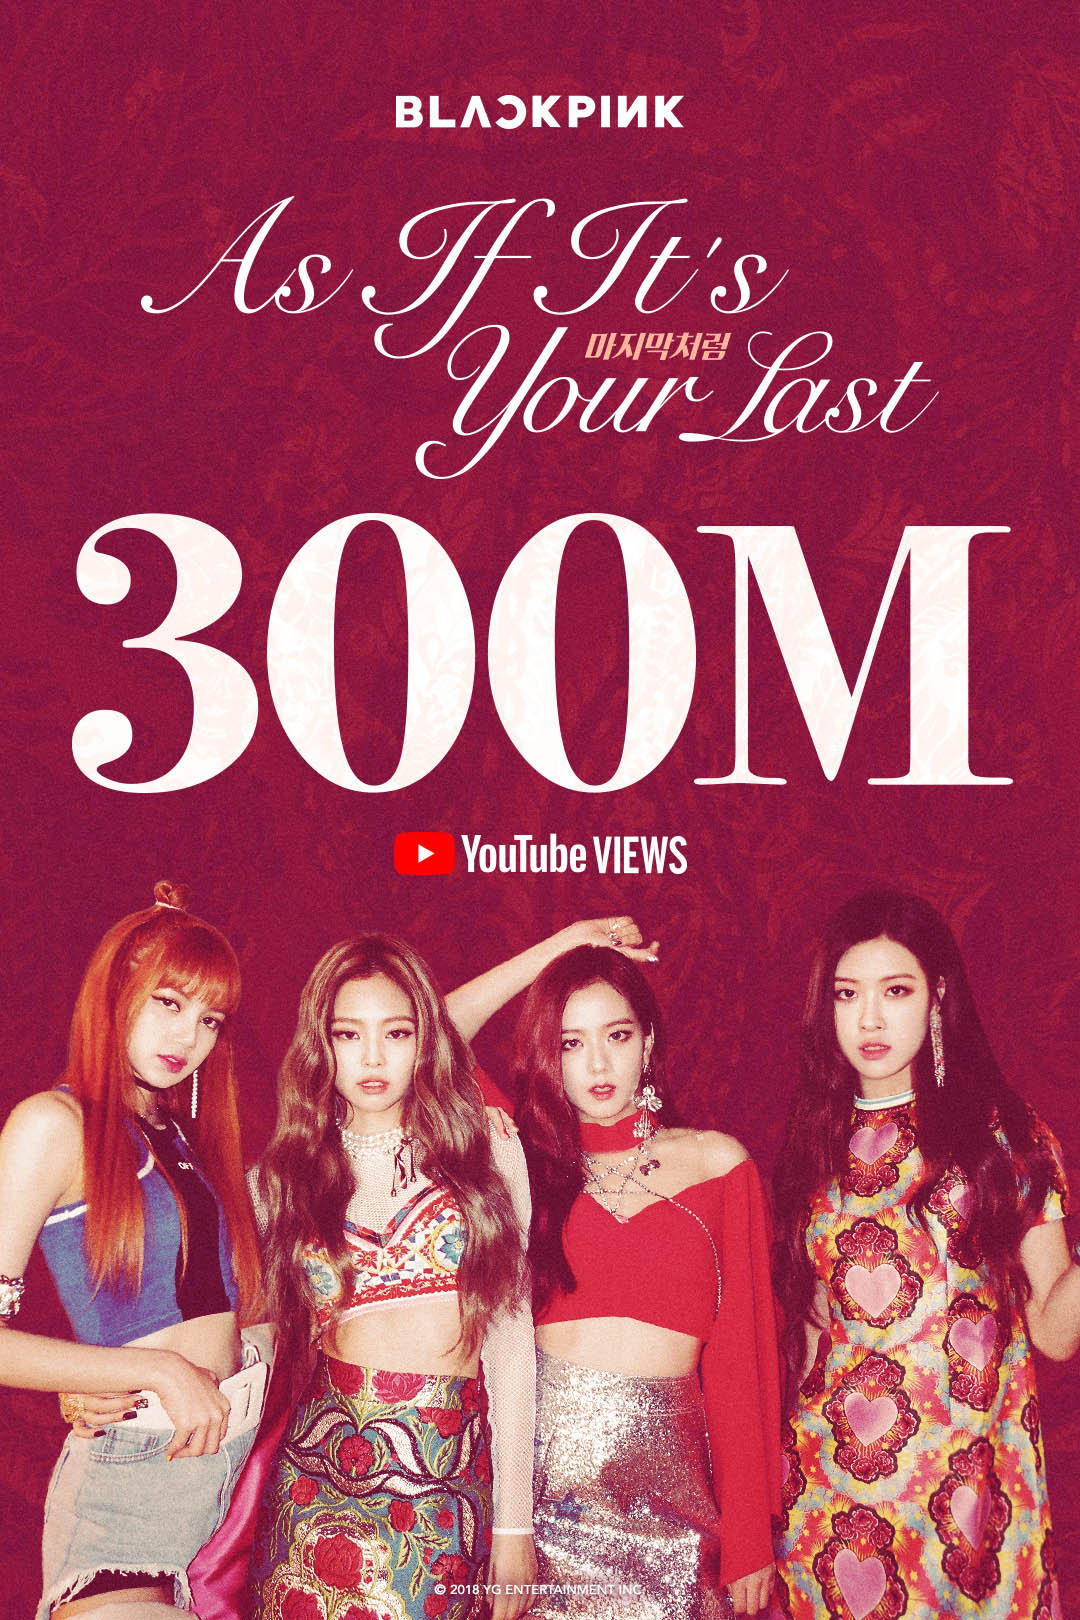 Black Pink's 'As If It's Your Last' music video hits 300 million Youtube views